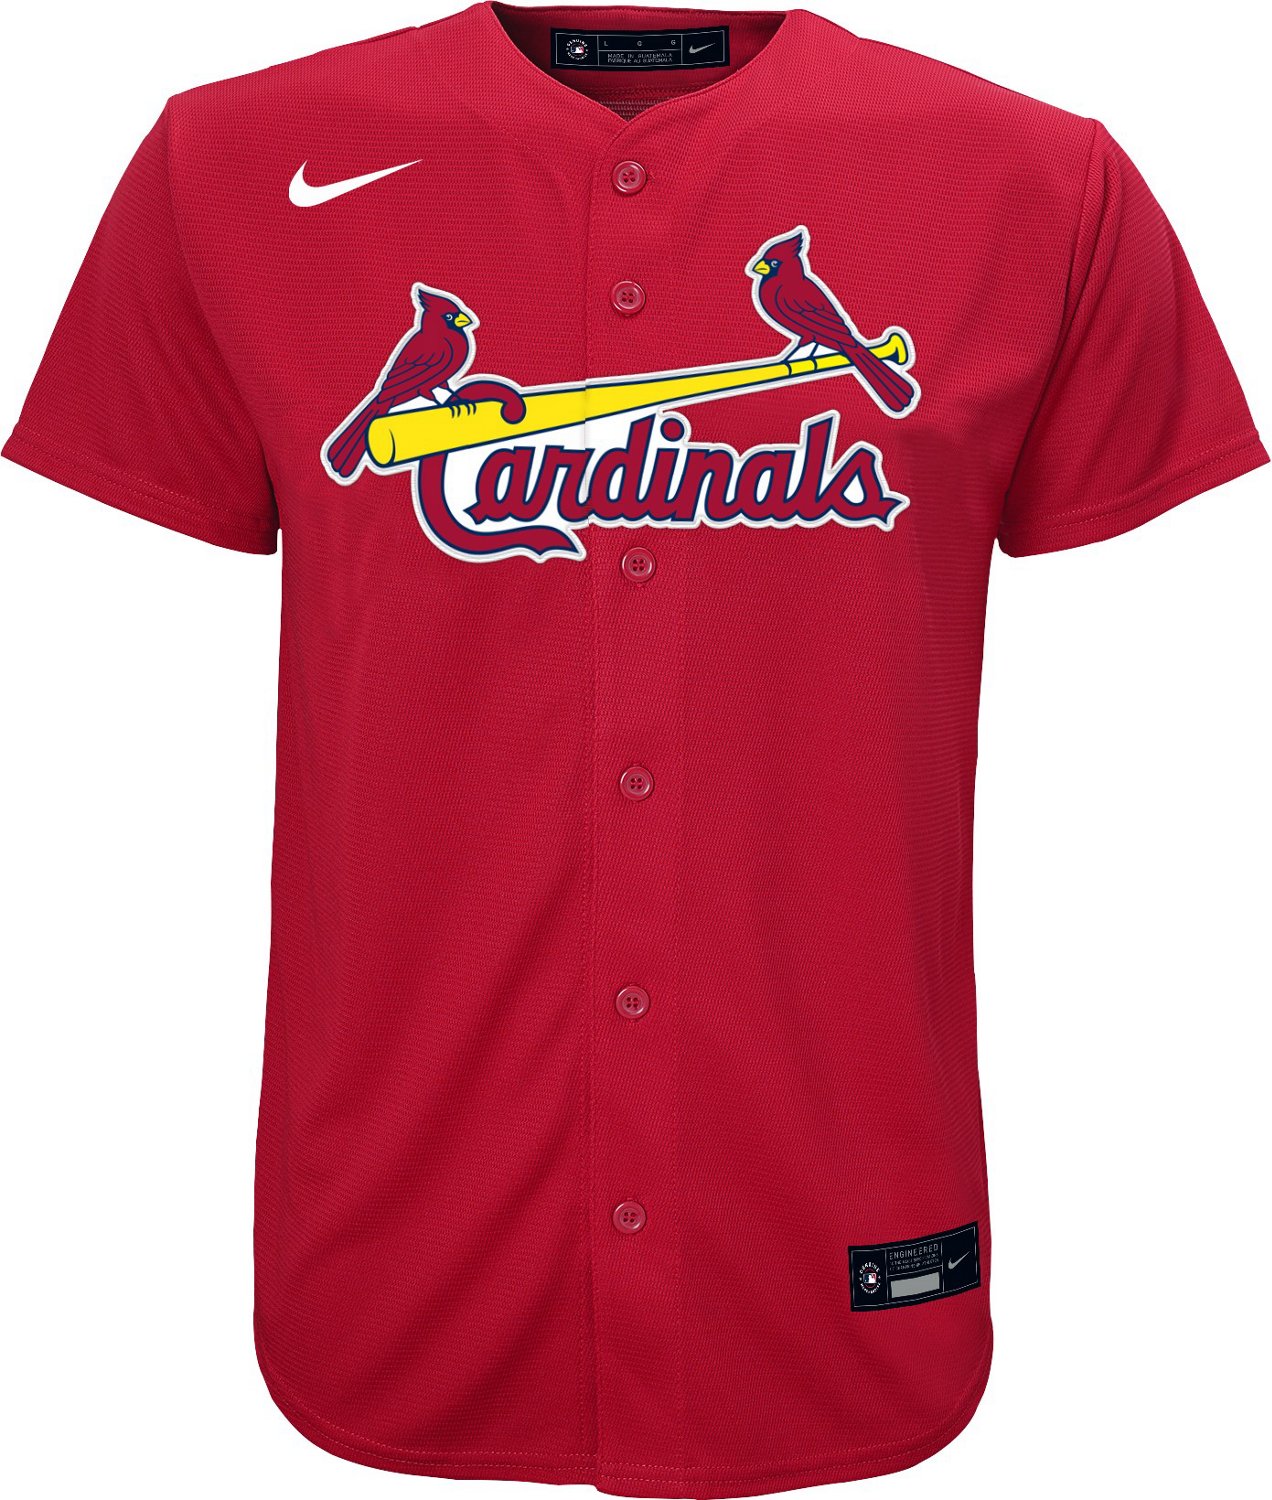 Nike Youth St. Louis Cardinals Team Replica Finished Jersey | Academy